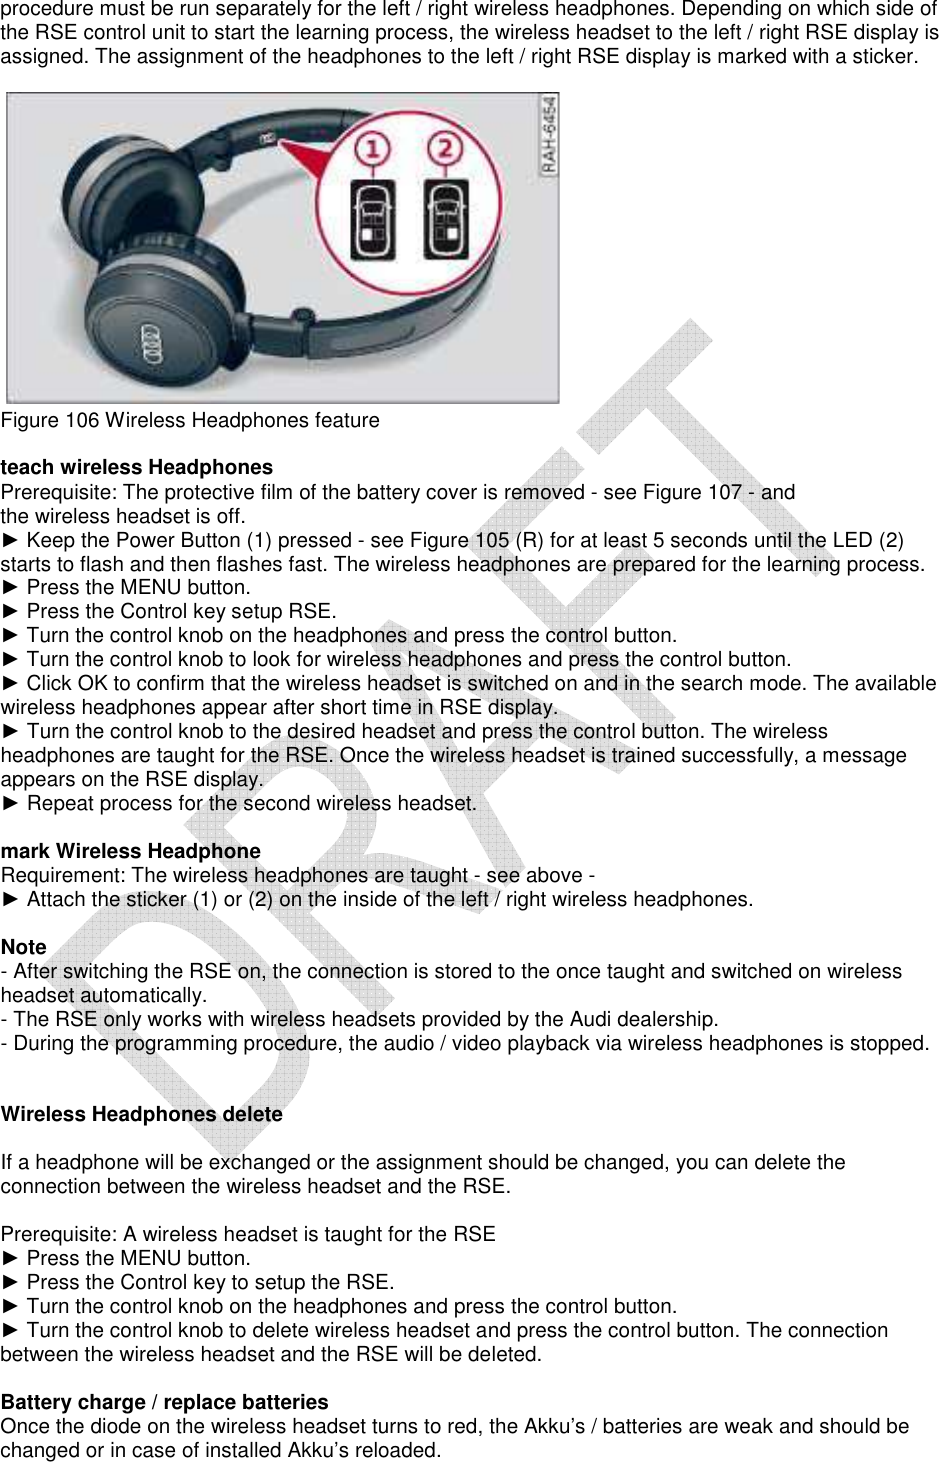   procedure must be run separately for the left / right wireless headphones. Depending on which side of the RSE control unit to start the learning process, the wireless headset to the left / right RSE display is assigned. The assignment of the headphones to the left / right RSE display is marked with a sticker.       Figure 106 Wireless Headphones feature   teach wireless Headphones  Prerequisite: The protective film of the battery cover is removed - see Figure 107 - and  the wireless headset is off.  ► Keep the Power Button (1) pressed - see Figure 105 (R) for at least 5 seconds until the LED (2) starts to flash and then flashes fast. The wireless headphones are prepared for the learning process.  ► Press the MENU button.  ► Press the Control key setup RSE.  ► Turn the control knob on the headphones and press the control button.  ► Turn the control knob to look for wireless headphones and press the control button.  ► Click OK to confirm that the wireless headset is switched on and in the search mode. The available wireless headphones appear after short time in RSE display.  ► Turn the control knob to the desired headset and press the control button. The wireless headphones are taught for the RSE. Once the wireless headset is trained successfully, a message appears on the RSE display.  ► Repeat process for the second wireless headset.   mark Wireless Headphone  Requirement: The wireless headphones are taught - see above -  ► Attach the sticker (1) or (2) on the inside of the left / right wireless headphones.    Note  - After switching the RSE on, the connection is stored to the once taught and switched on wireless headset automatically.  - The RSE only works with wireless headsets provided by the Audi dealership.  - During the programming procedure, the audio / video playback via wireless headphones is stopped.    Wireless Headphones delete   If a headphone will be exchanged or the assignment should be changed, you can delete the connection between the wireless headset and the RSE.   Prerequisite: A wireless headset is taught for the RSE  ► Press the MENU button.  ► Press the Control key to setup the RSE.  ► Turn the control knob on the headphones and press the control button.  ► Turn the control knob to delete wireless headset and press the control button. The connection between the wireless headset and the RSE will be deleted.   Battery charge / replace batteries  Once the diode on the wireless headset turns to red, the Akku’s / batteries are weak and should be changed or in case of installed Akku’s reloaded.  